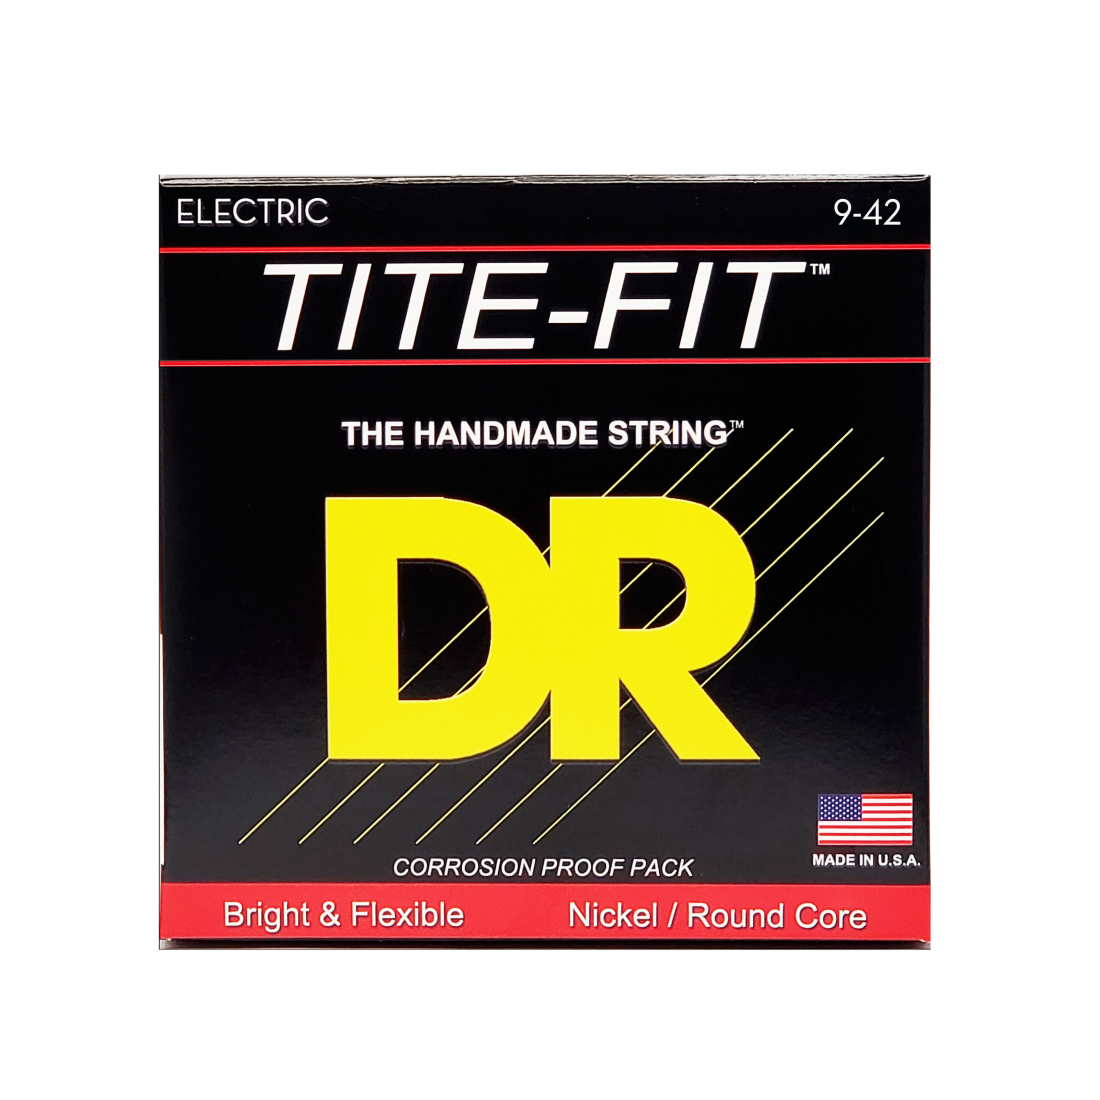 Tite-Fit Lite n\' Tite Roundwound Nickel-Plated Electric Strings 9-42